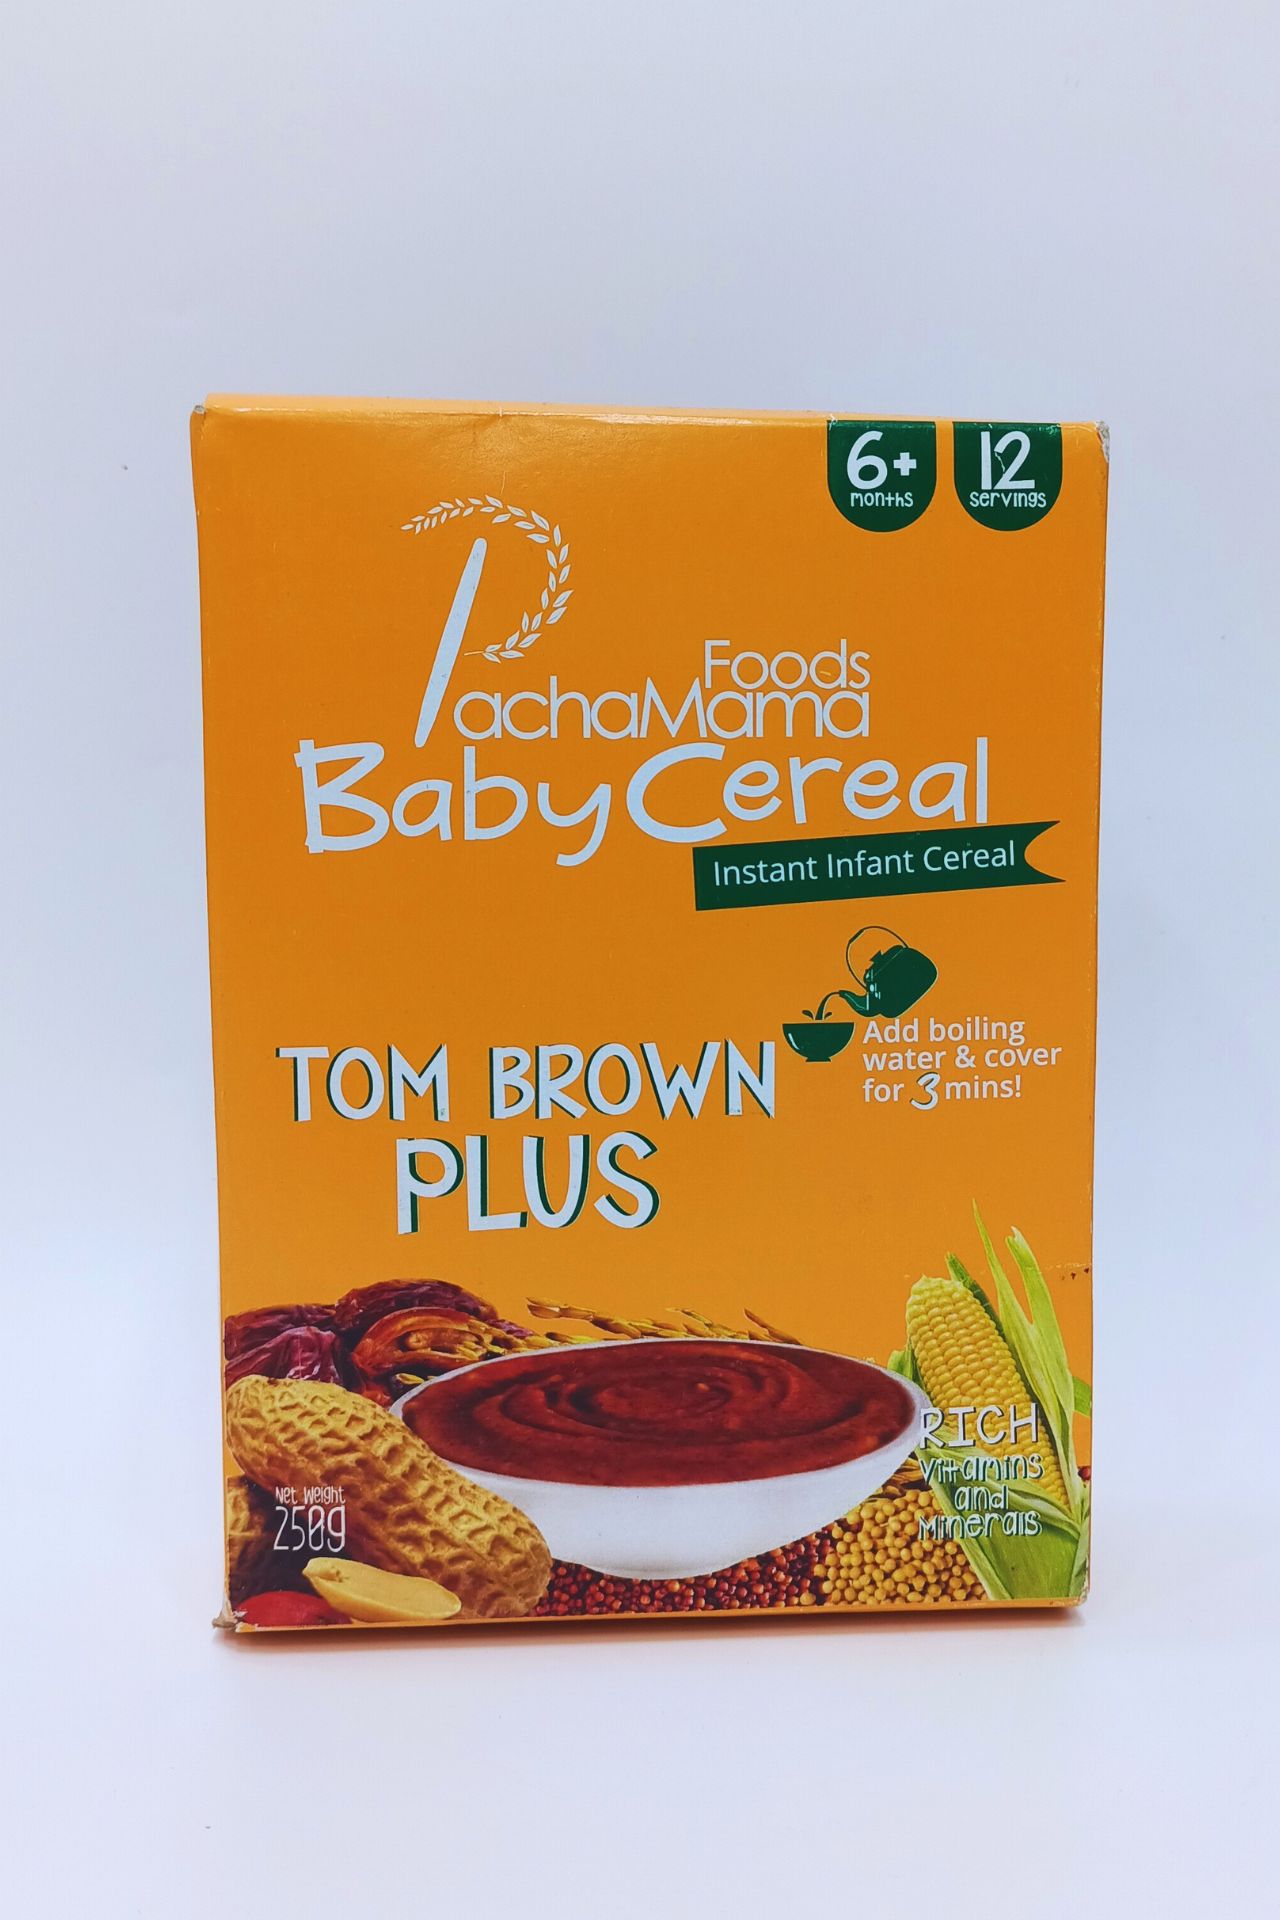 Instant Baby Cereal – Pachamama